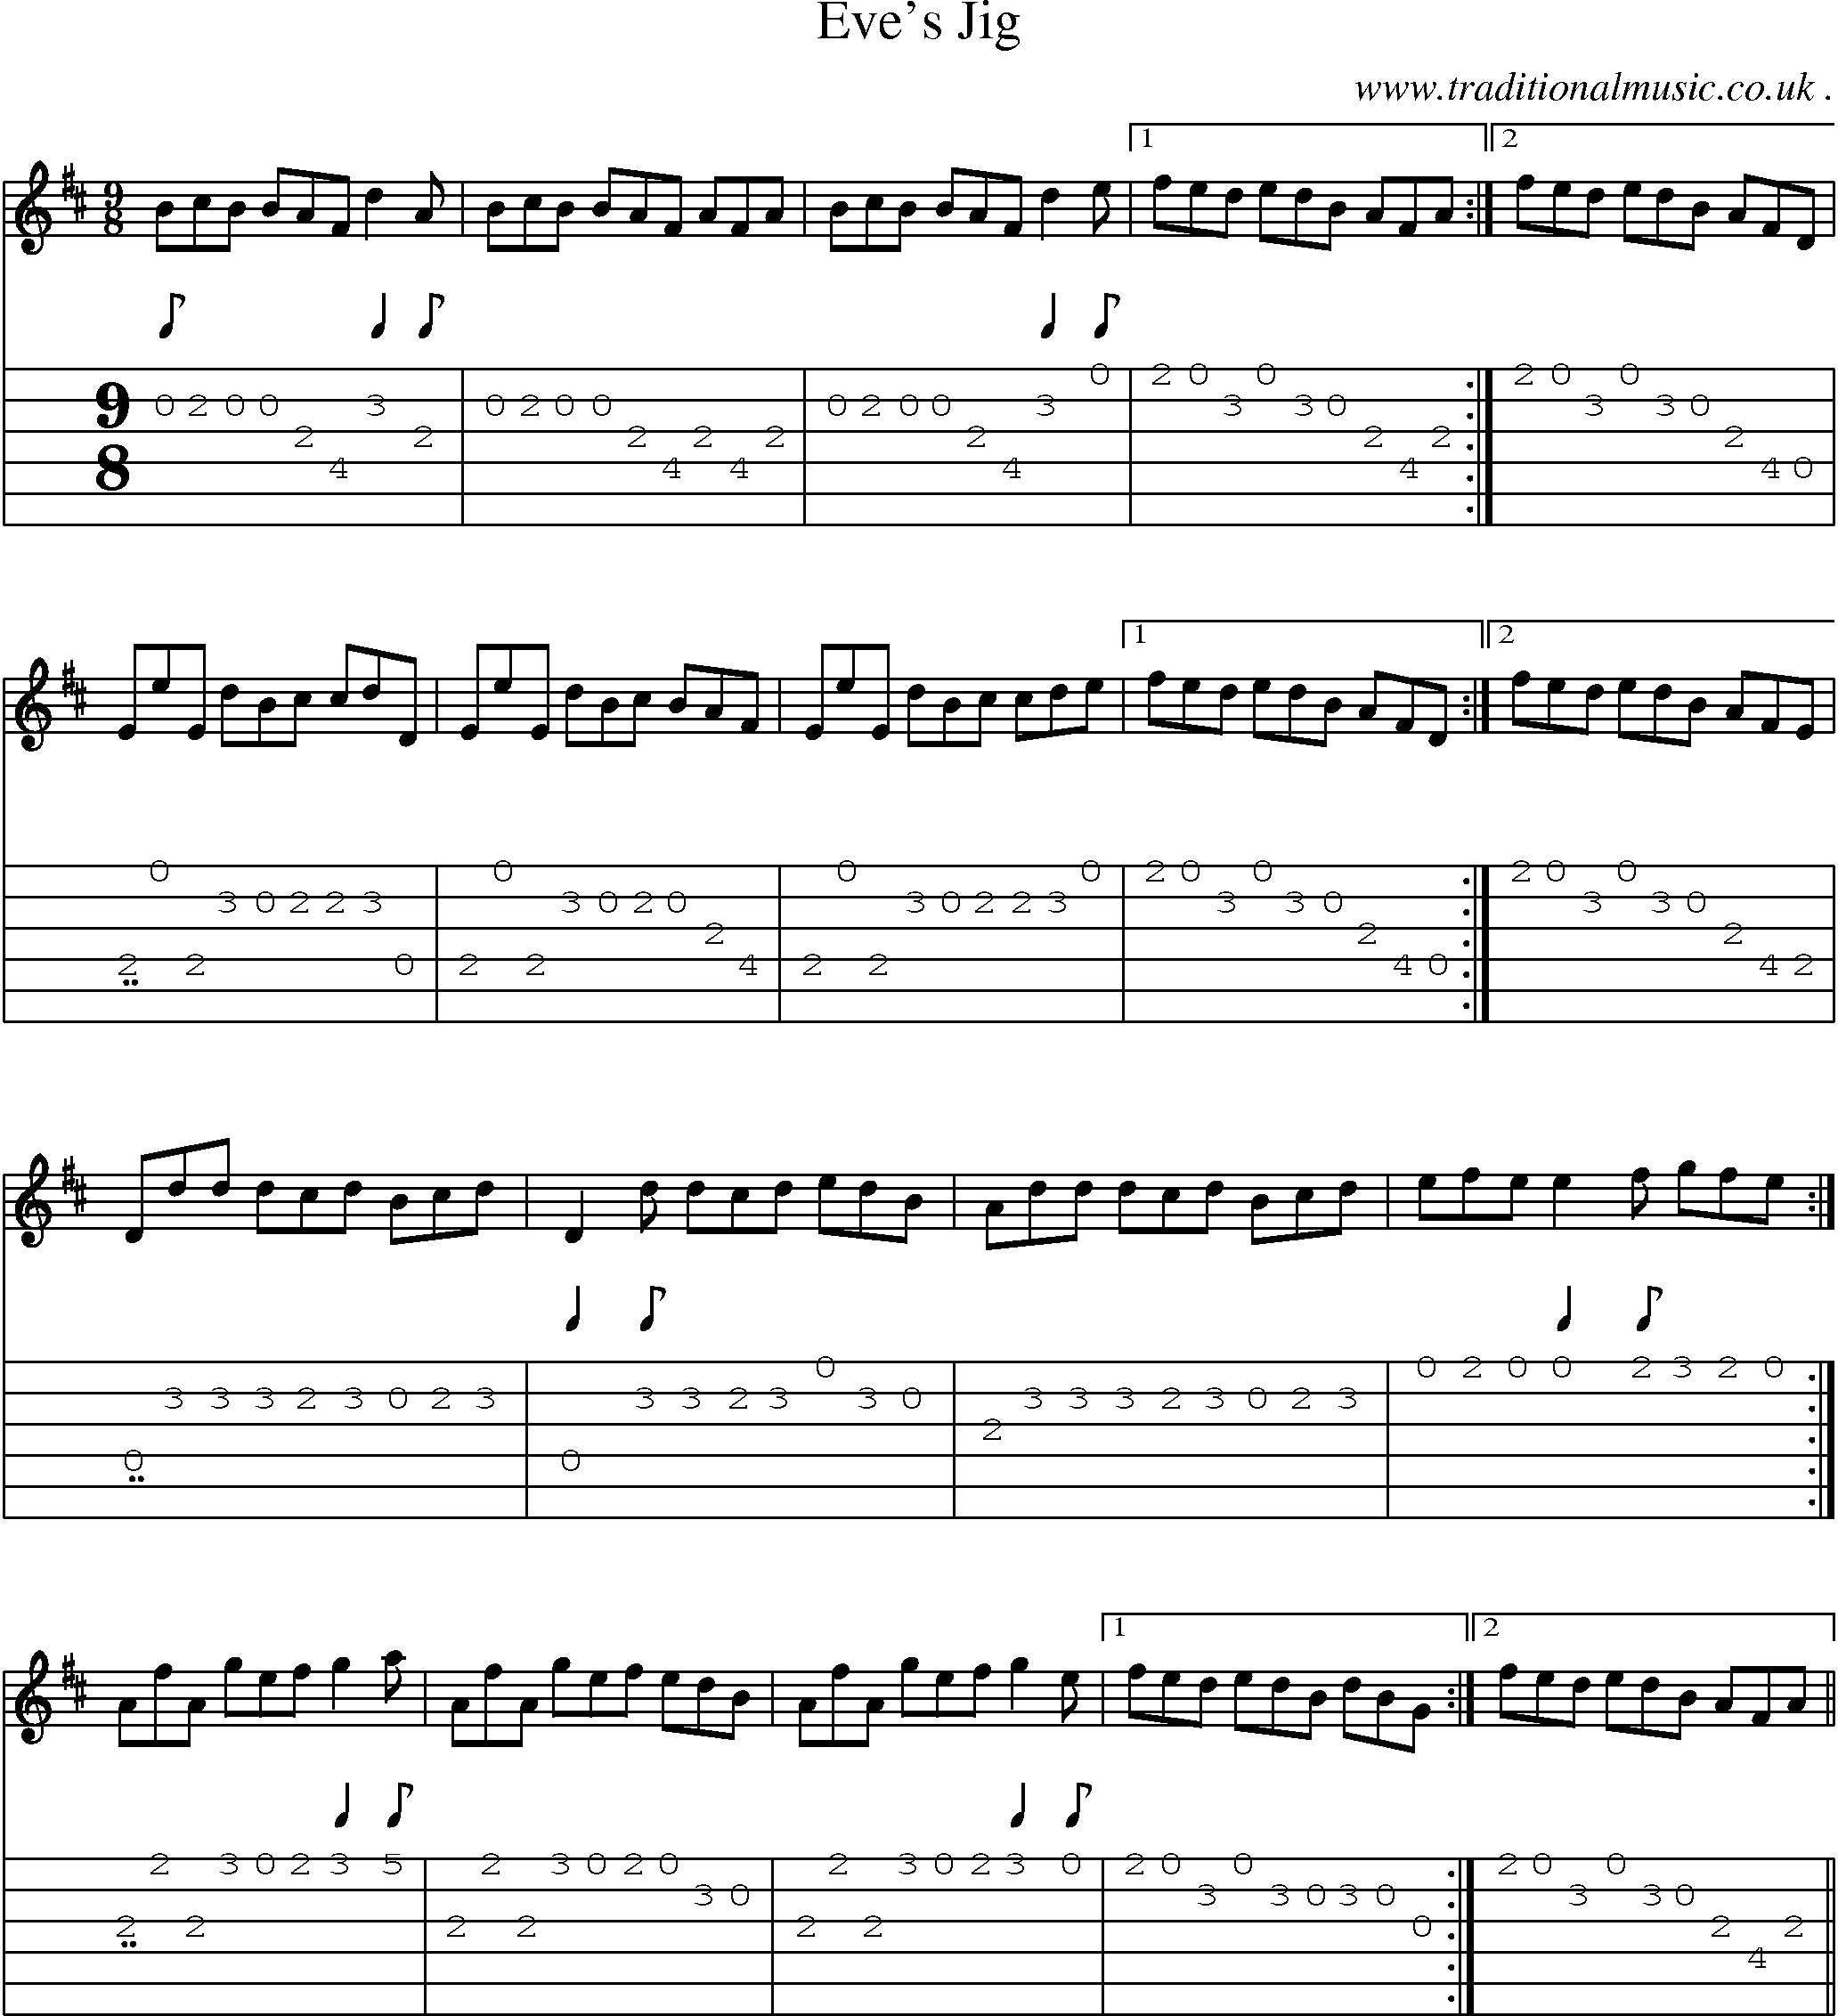 Sheet-Music and Guitar Tabs for Eves Jig